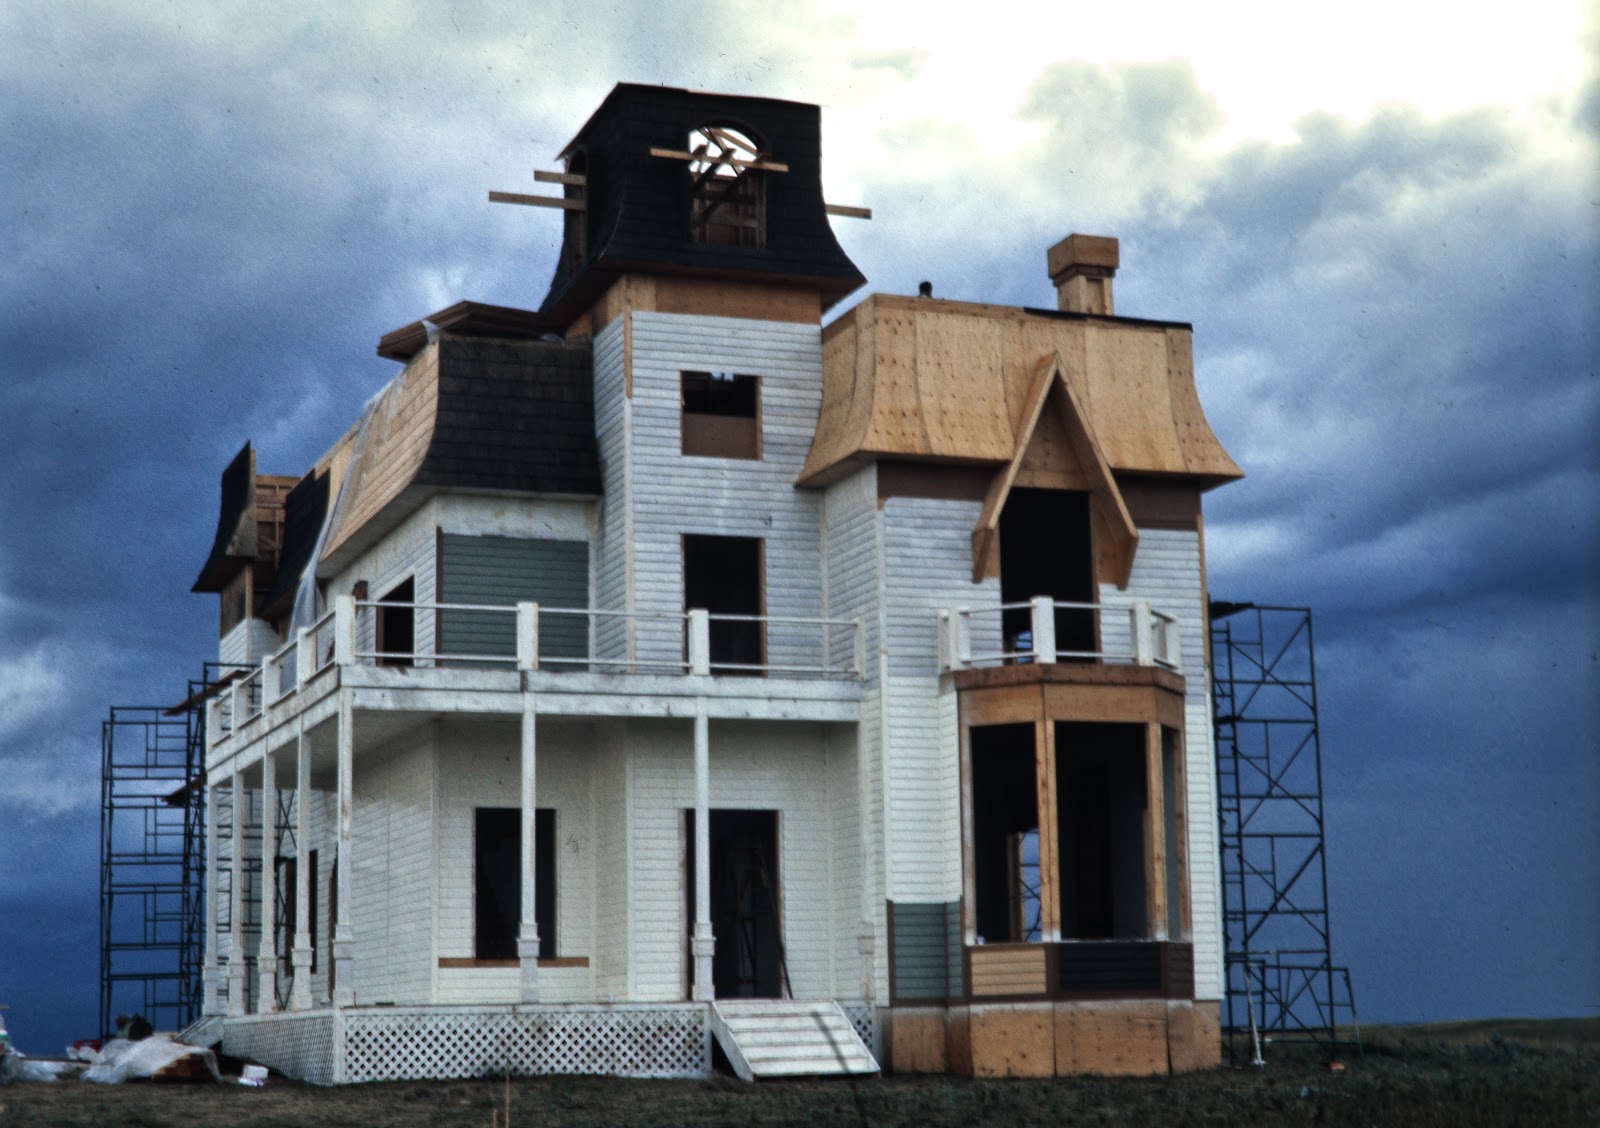 Construction of the Days of Heaven house, filmed in